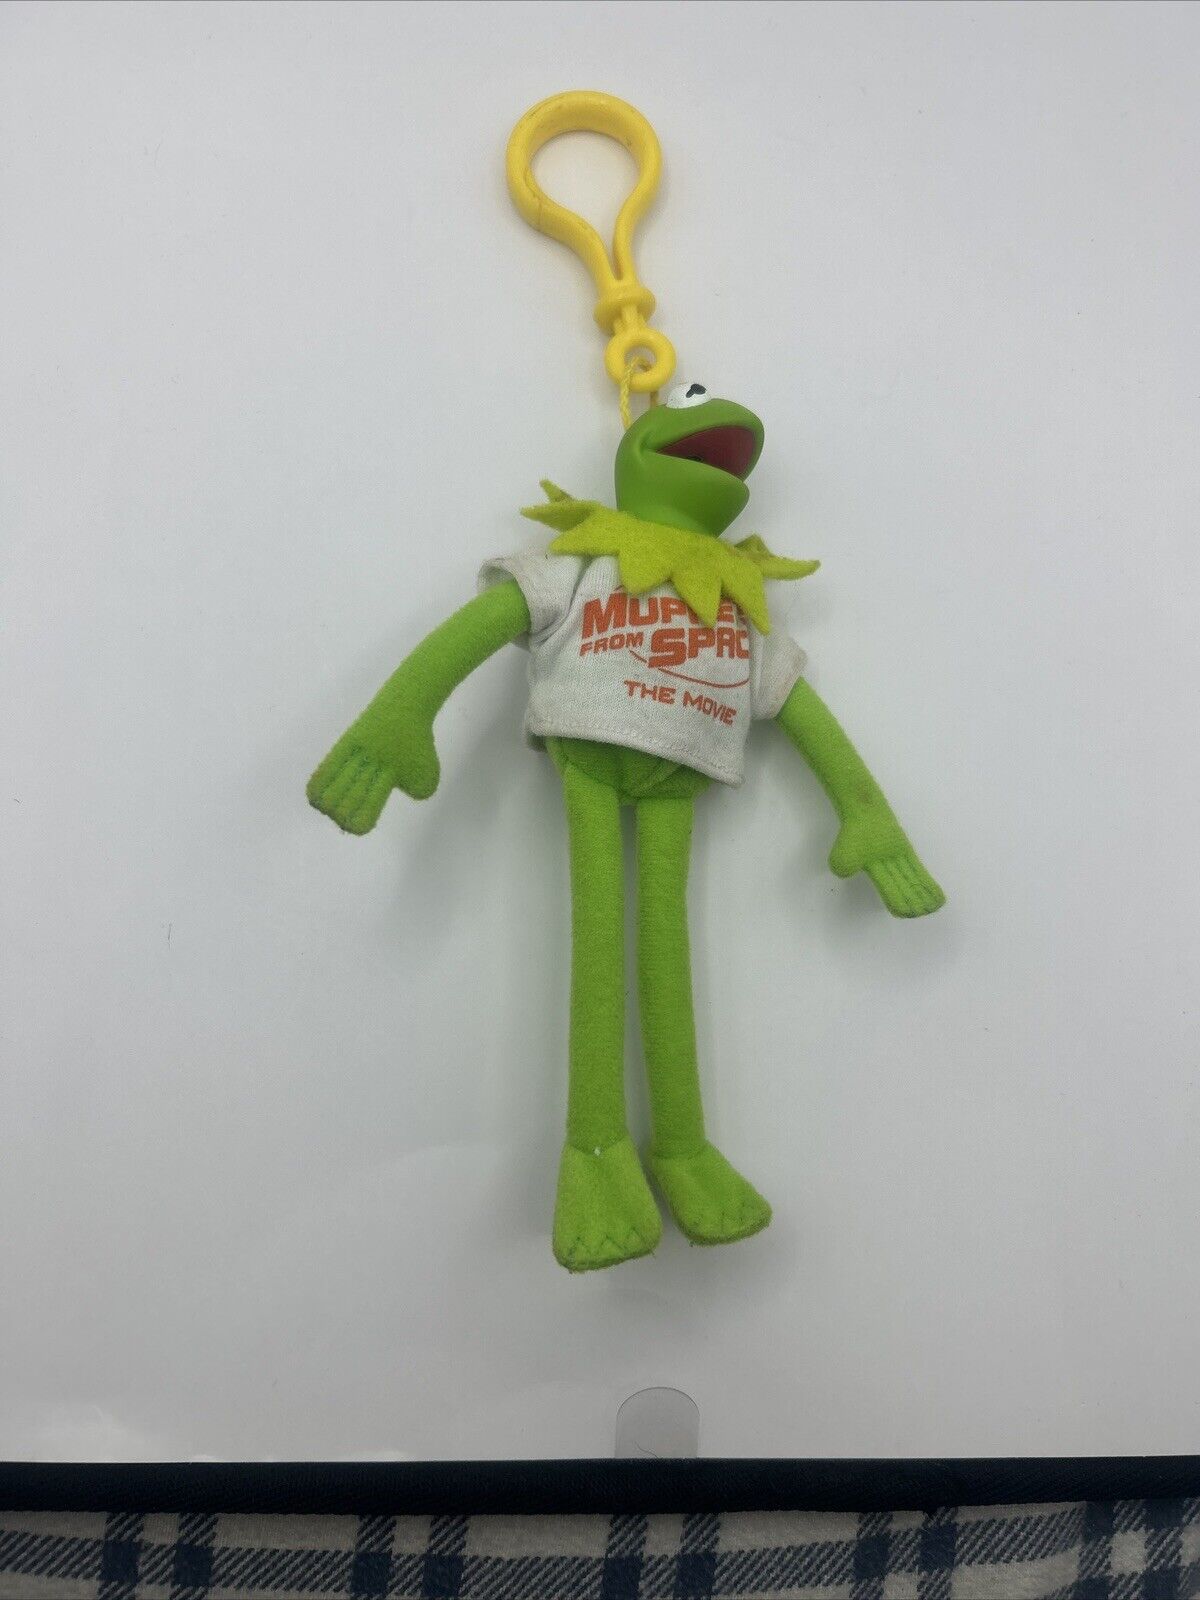 Kermit The Frog Keychain Plush Vintage Wendy’s 1999 Muppets From Space The Movie